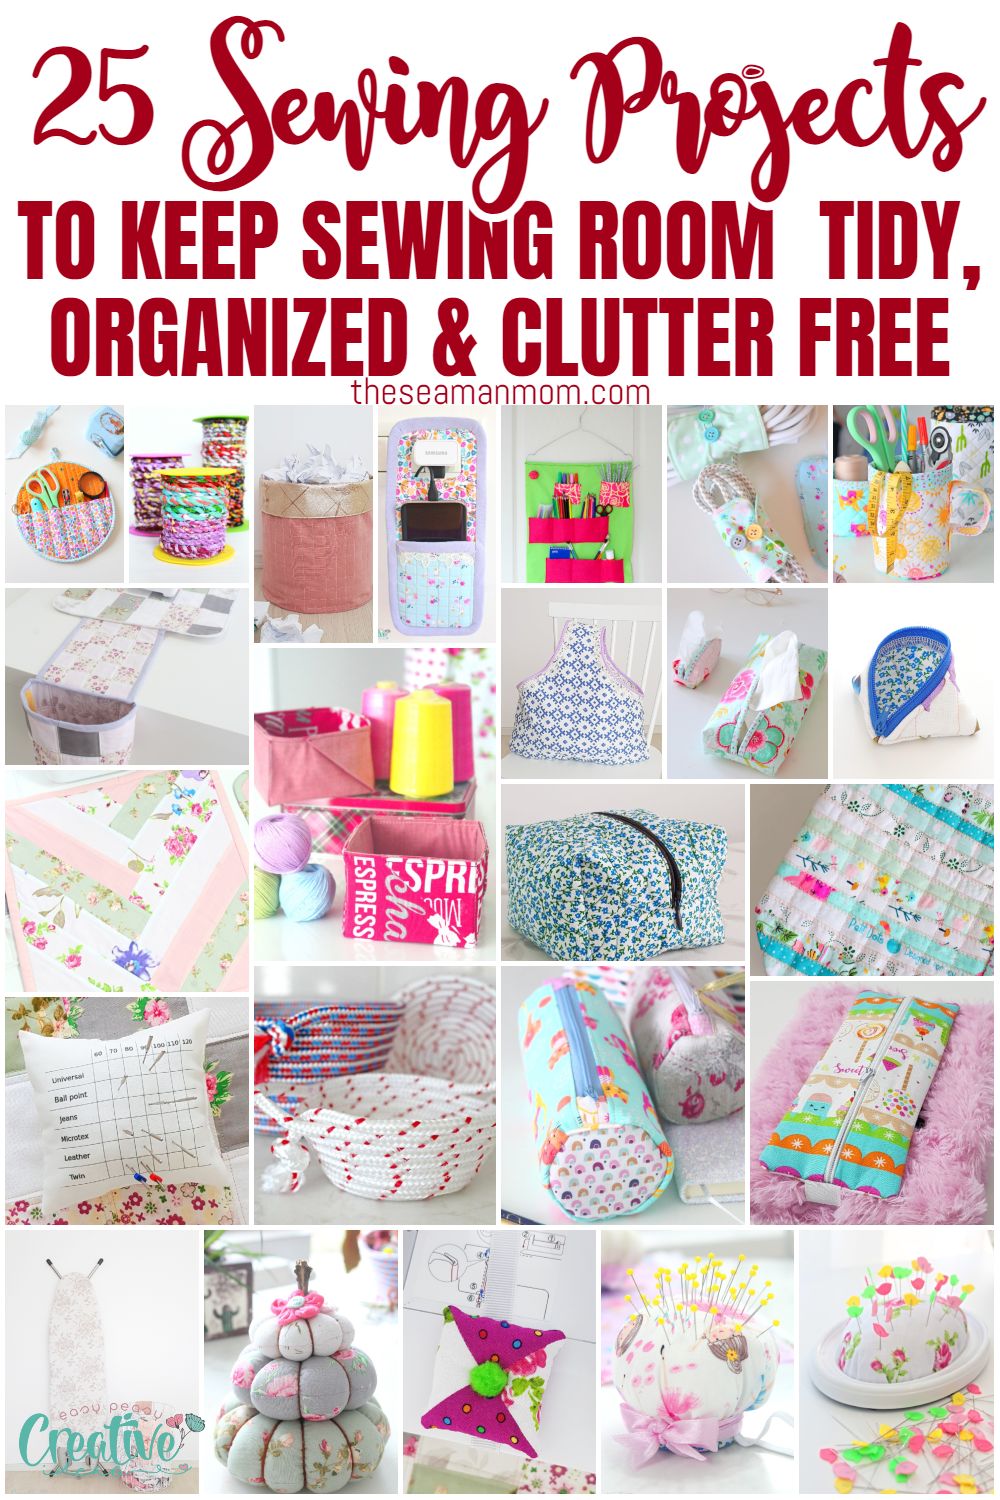 25 Sewing projects to keep your sewing room tidy, organized & clutter-free